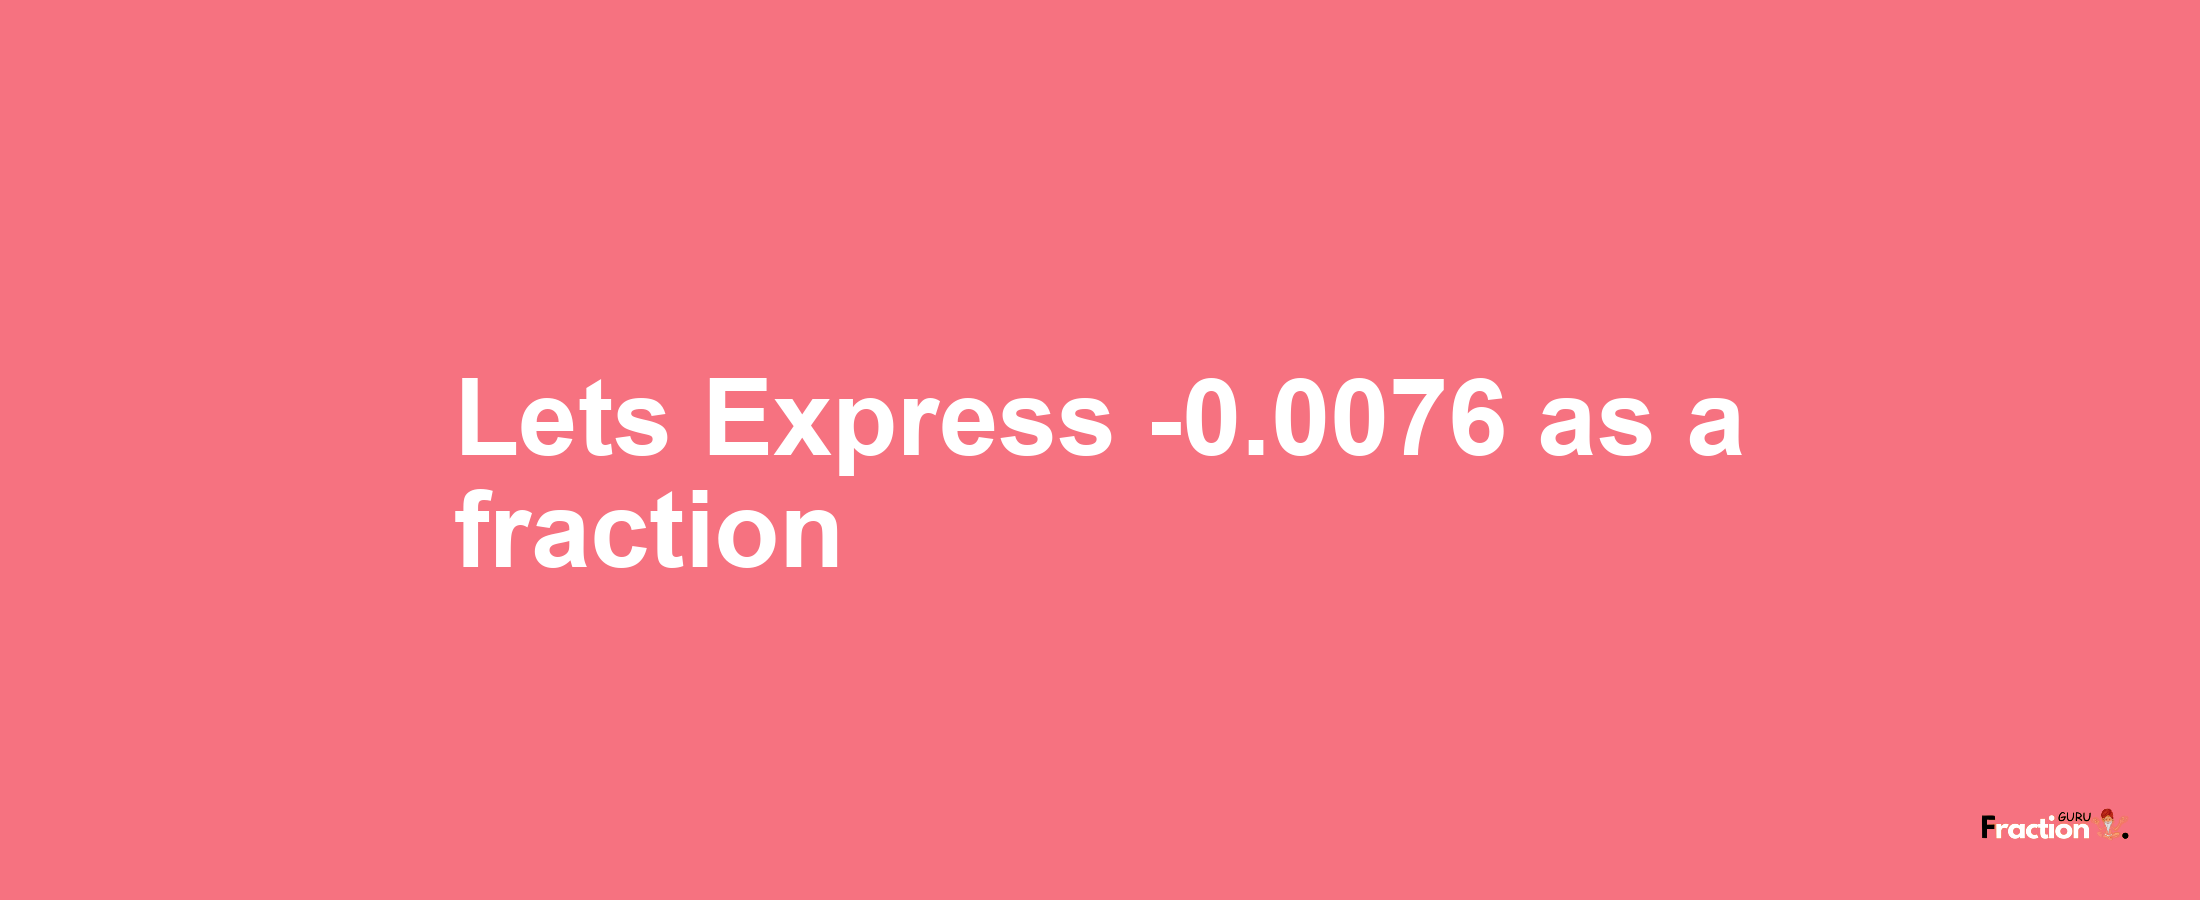 Lets Express -0.0076 as afraction